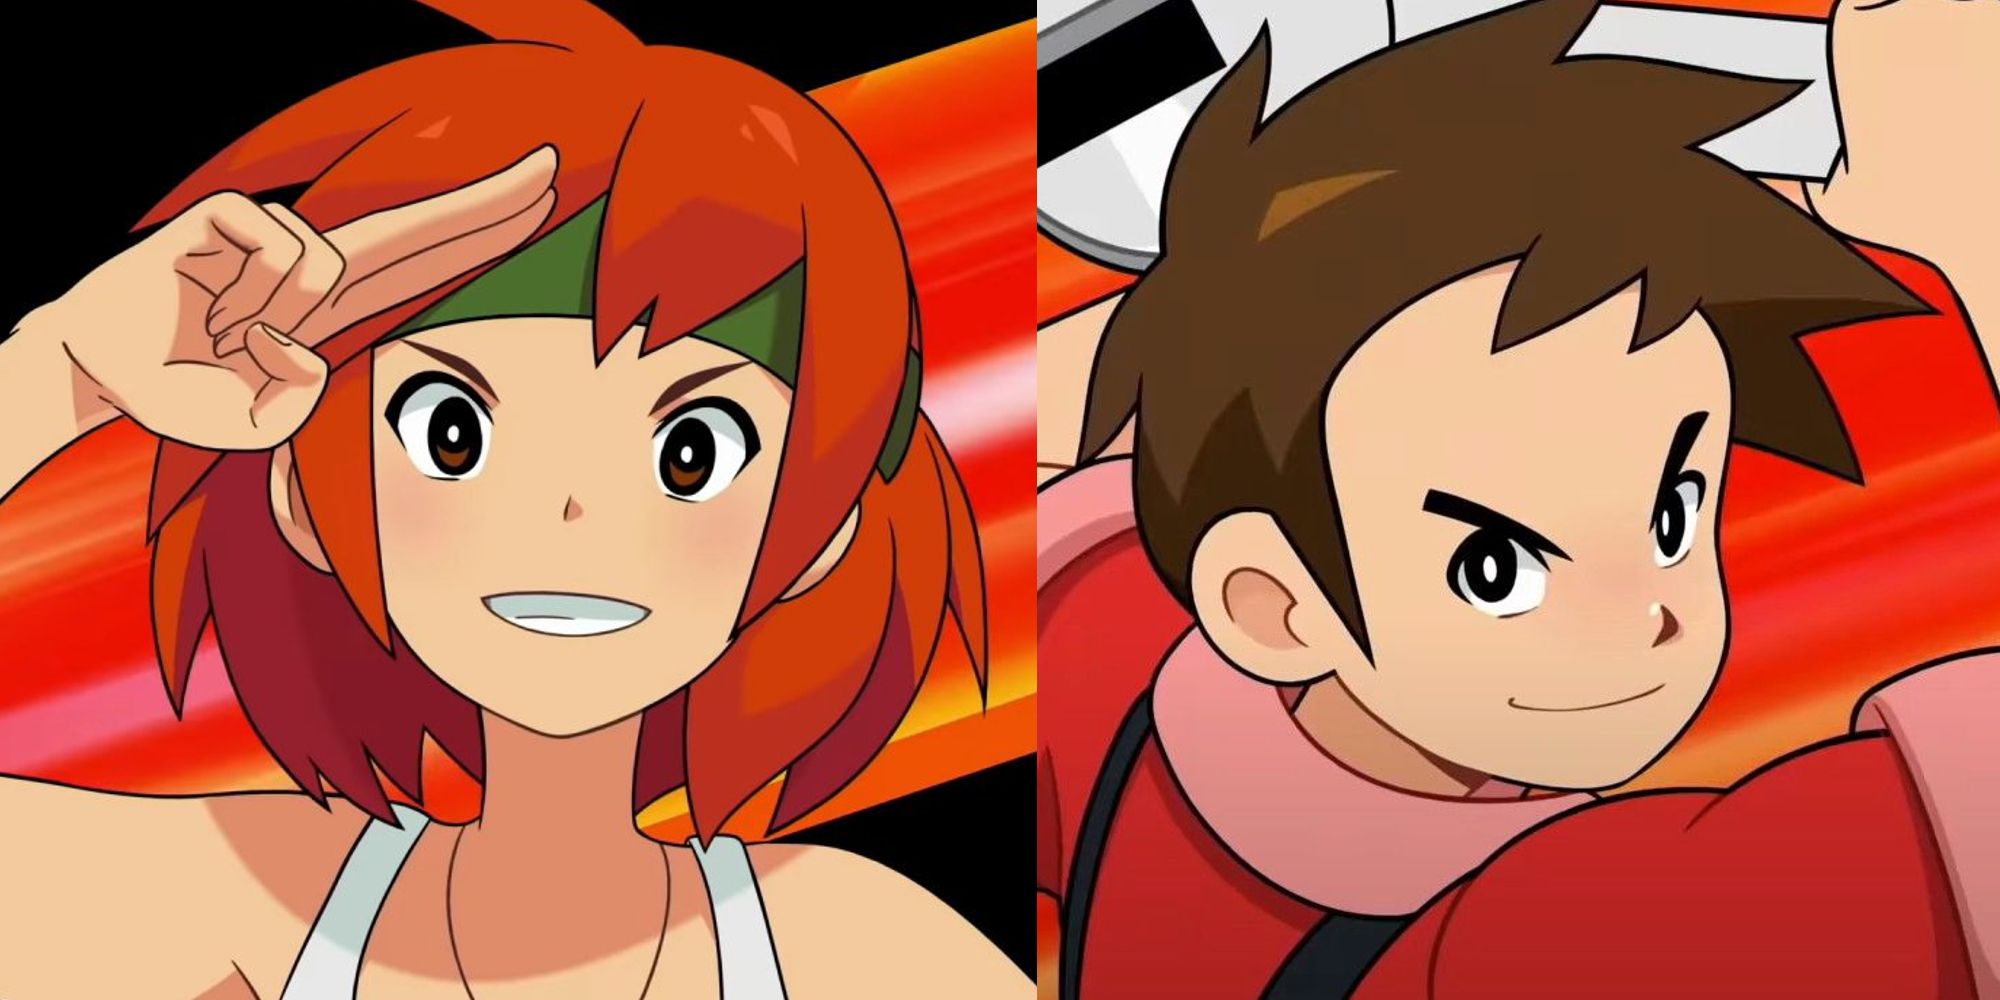 Sami and Andy in action poses from Advance Wars art